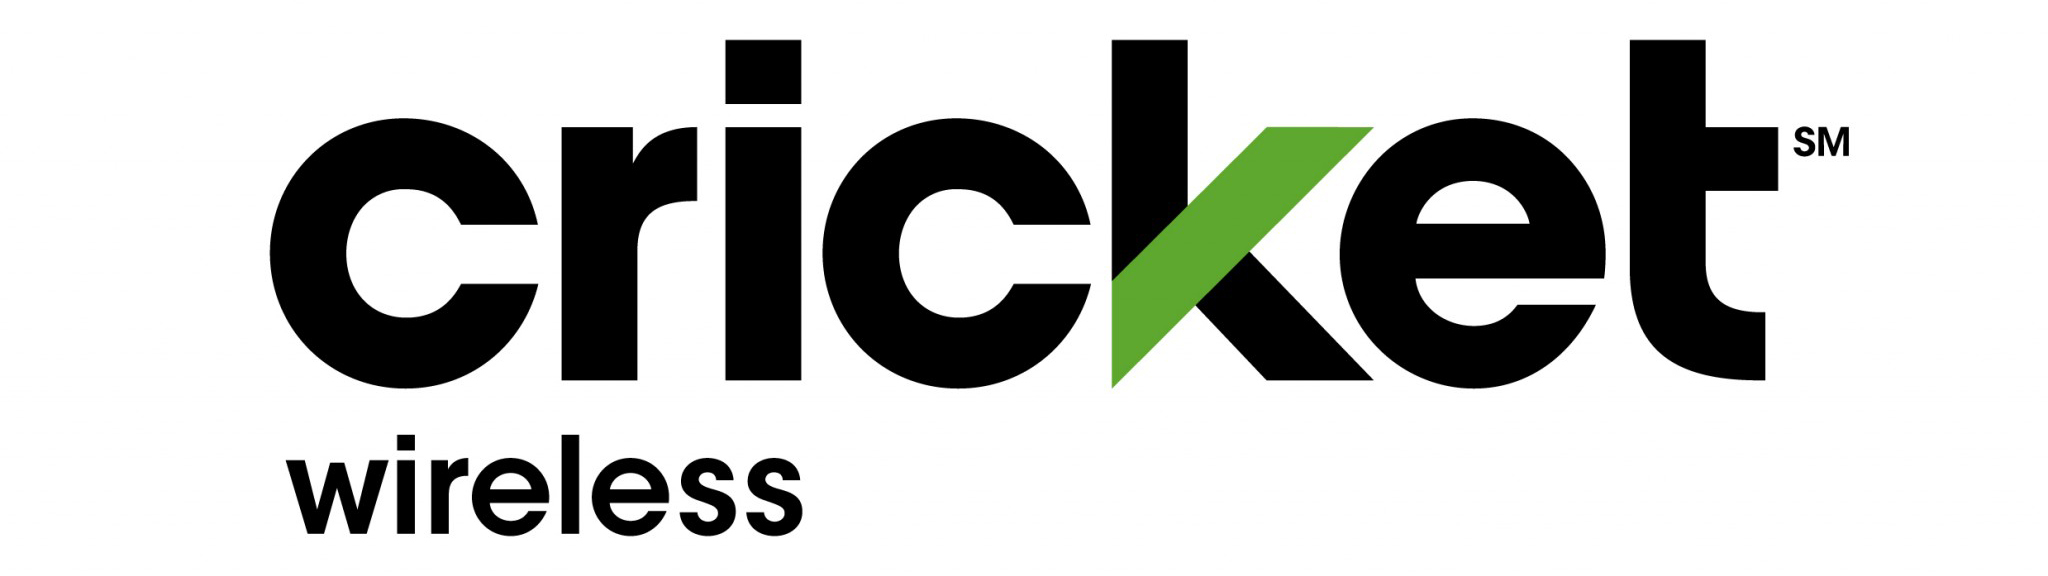 best cell phone providers: Cricket Wireless is ideal for non-data usage